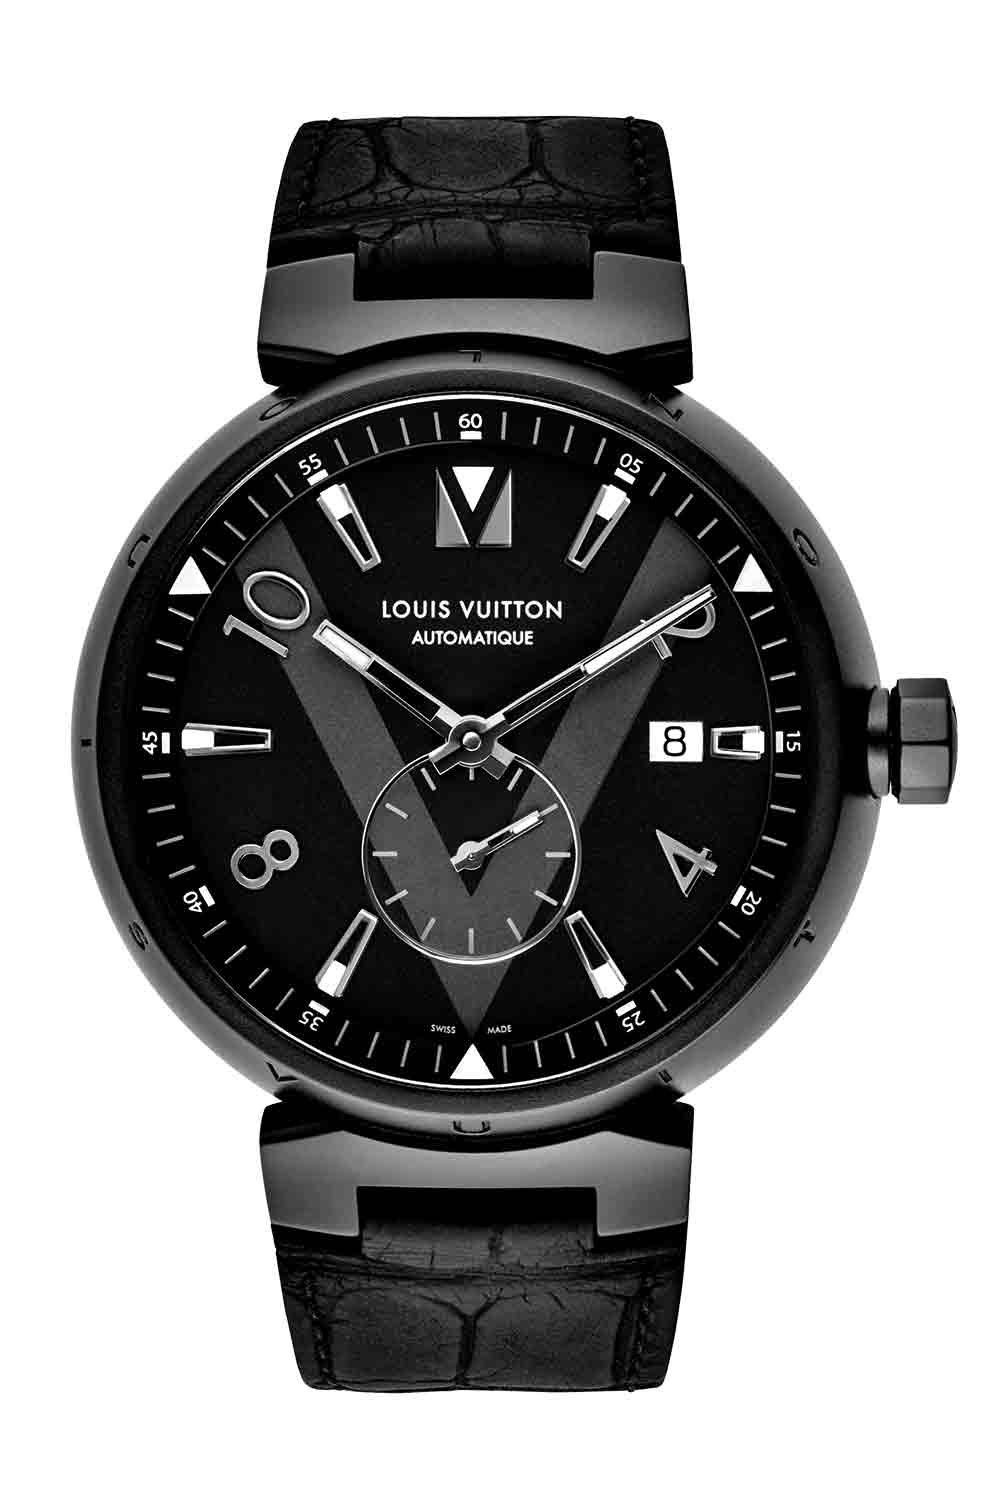 Tambour-All-Black-Petite-Seconde-without-background